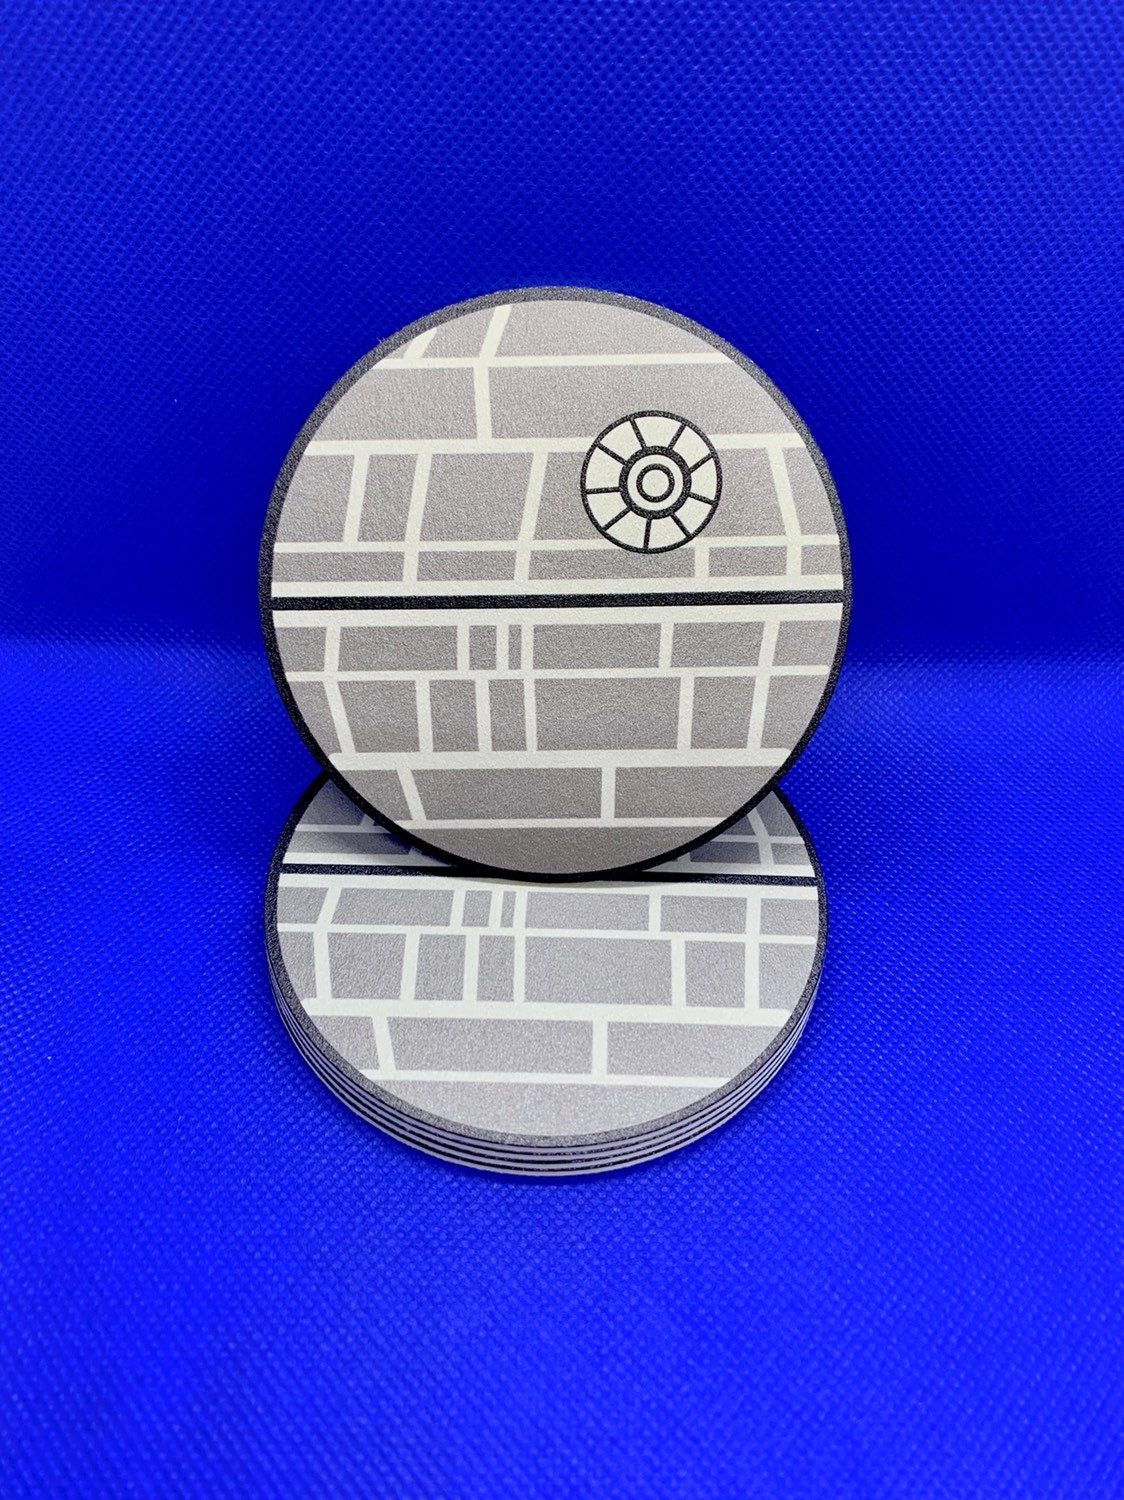 Star Wars? Death Star Auto Cup Holder Coasters 2 ct Carded Pack